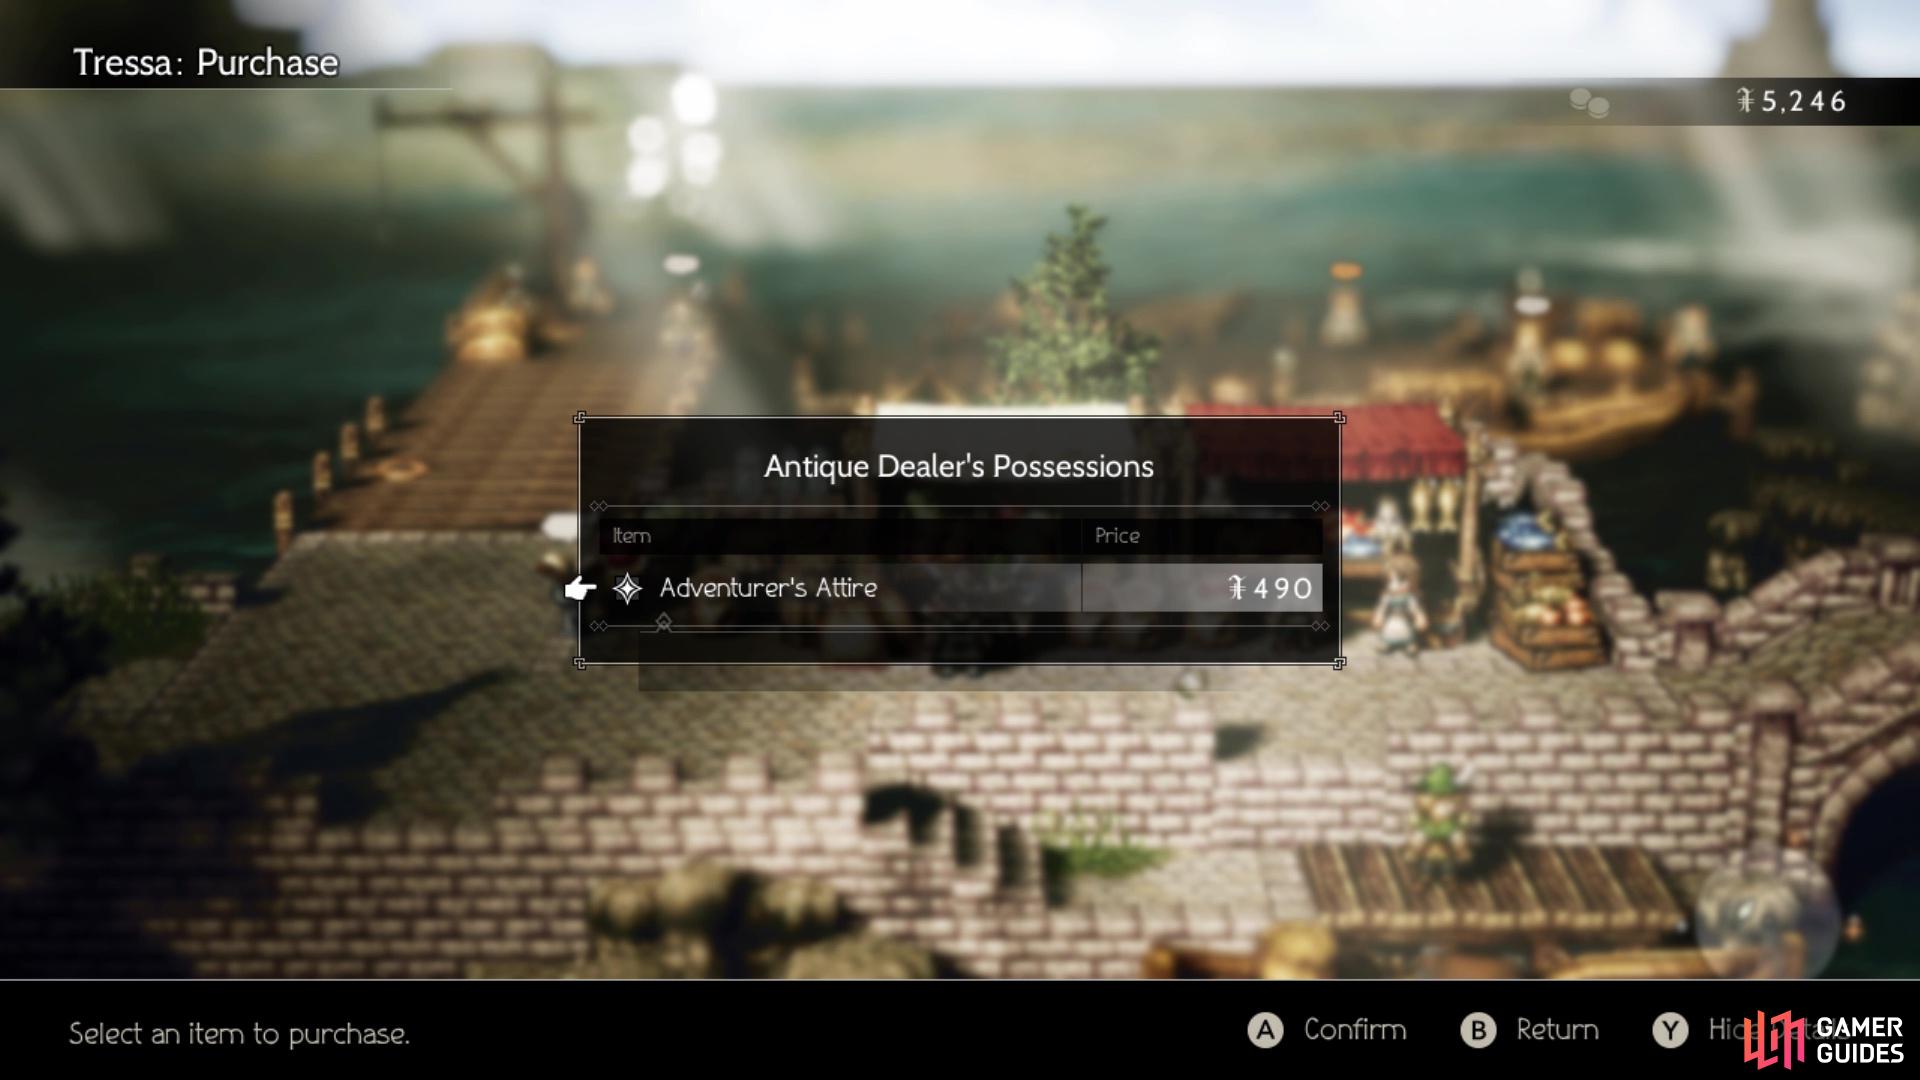 You can buy the Adventurer's Attire from the Antique Dealer for Le Mann